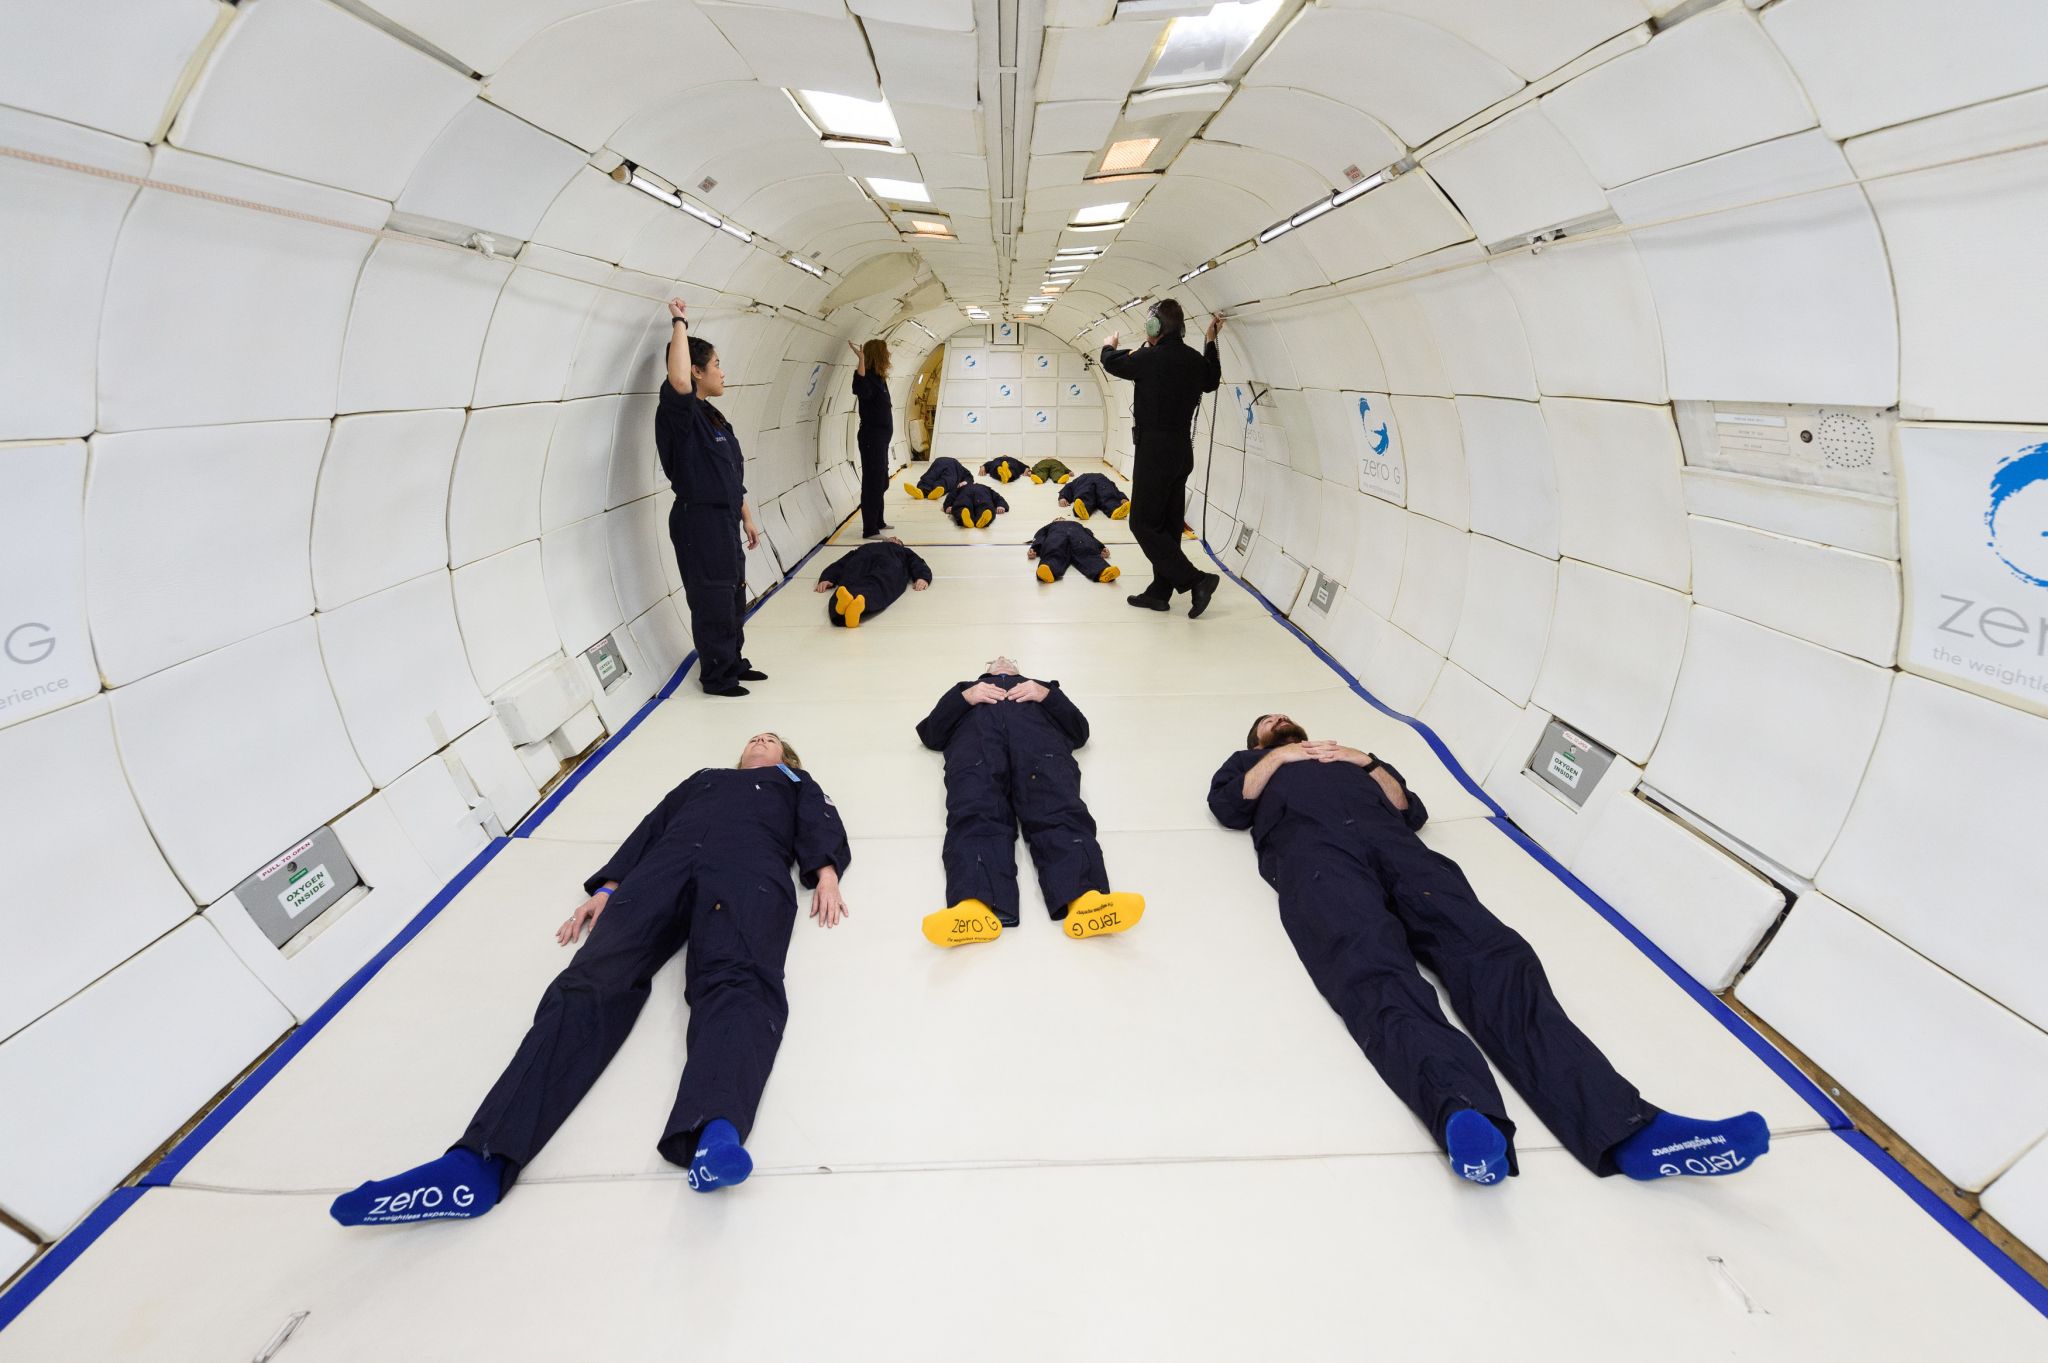 What it's like to spend 6 minutes in zero gravity.